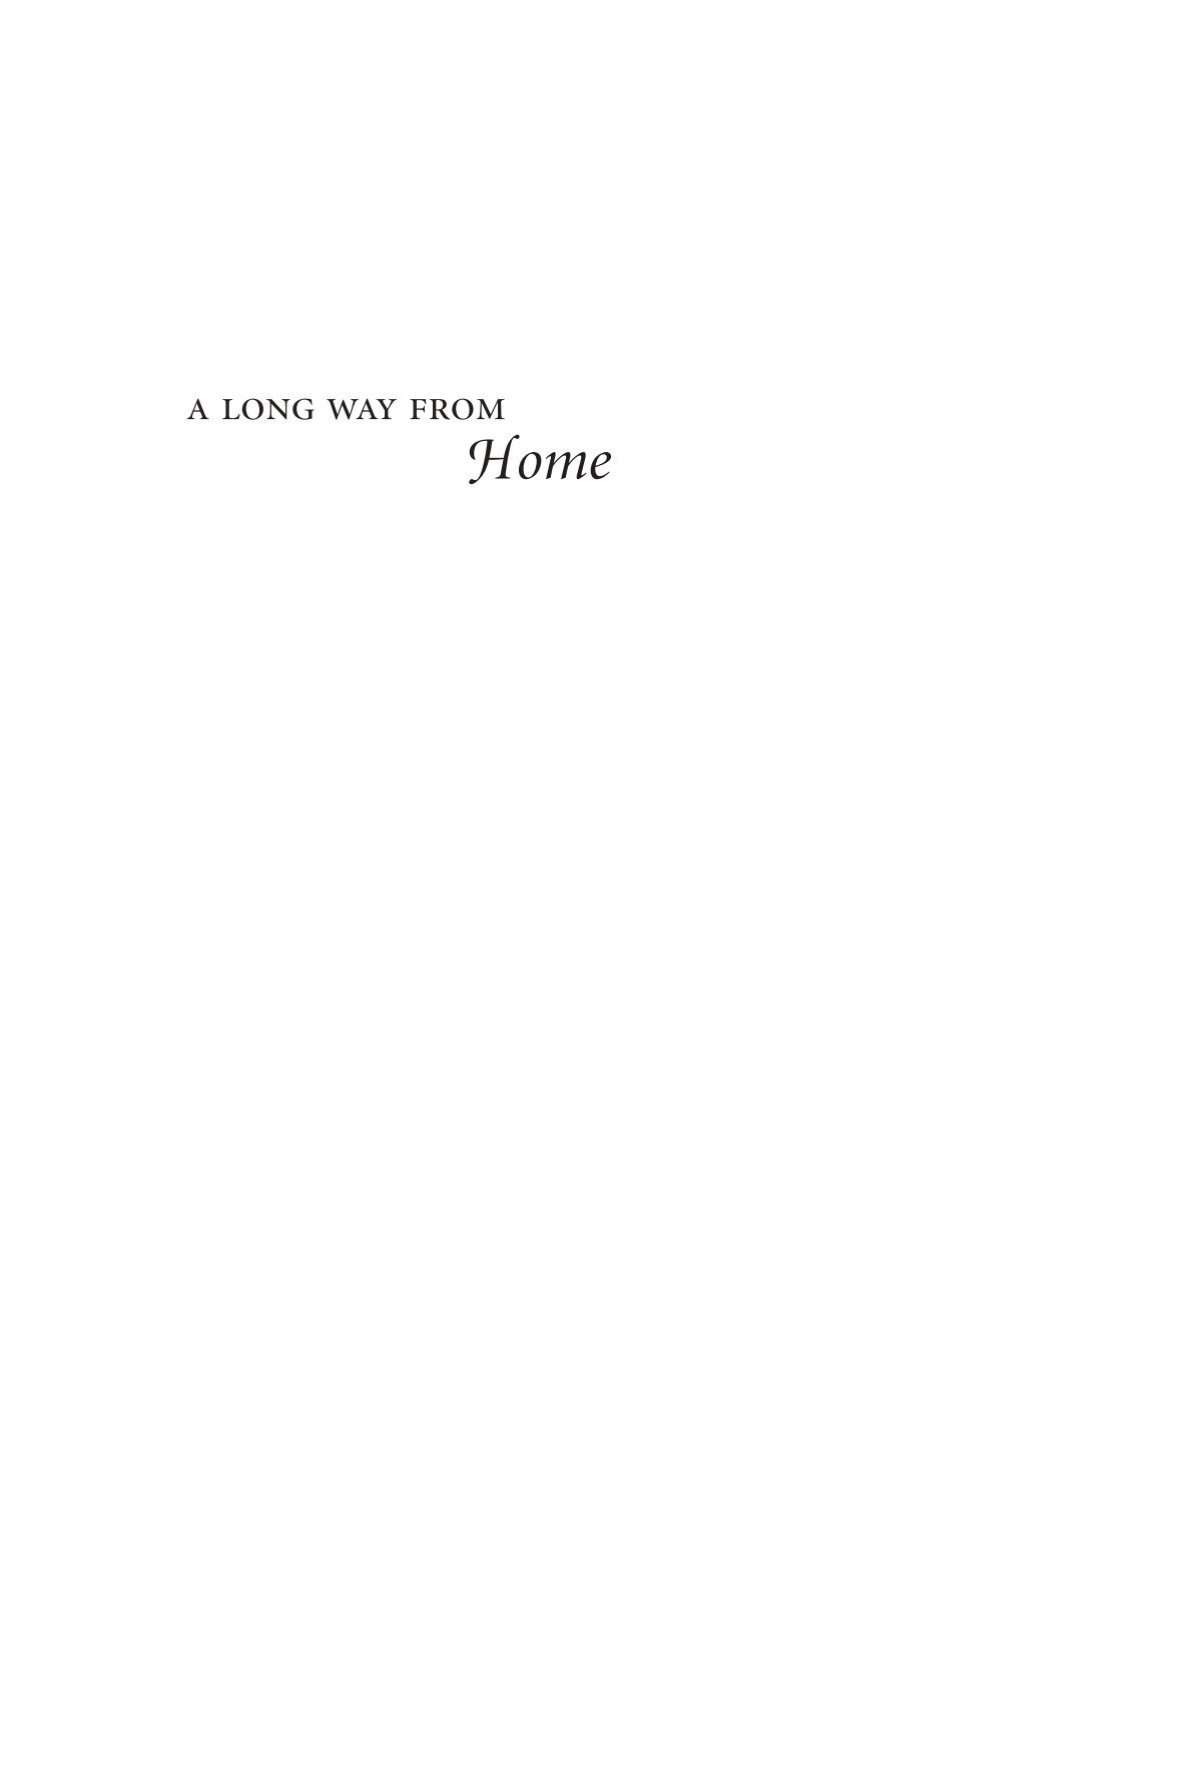 Download A Long Way From Home Pdf Site De Thomas Free